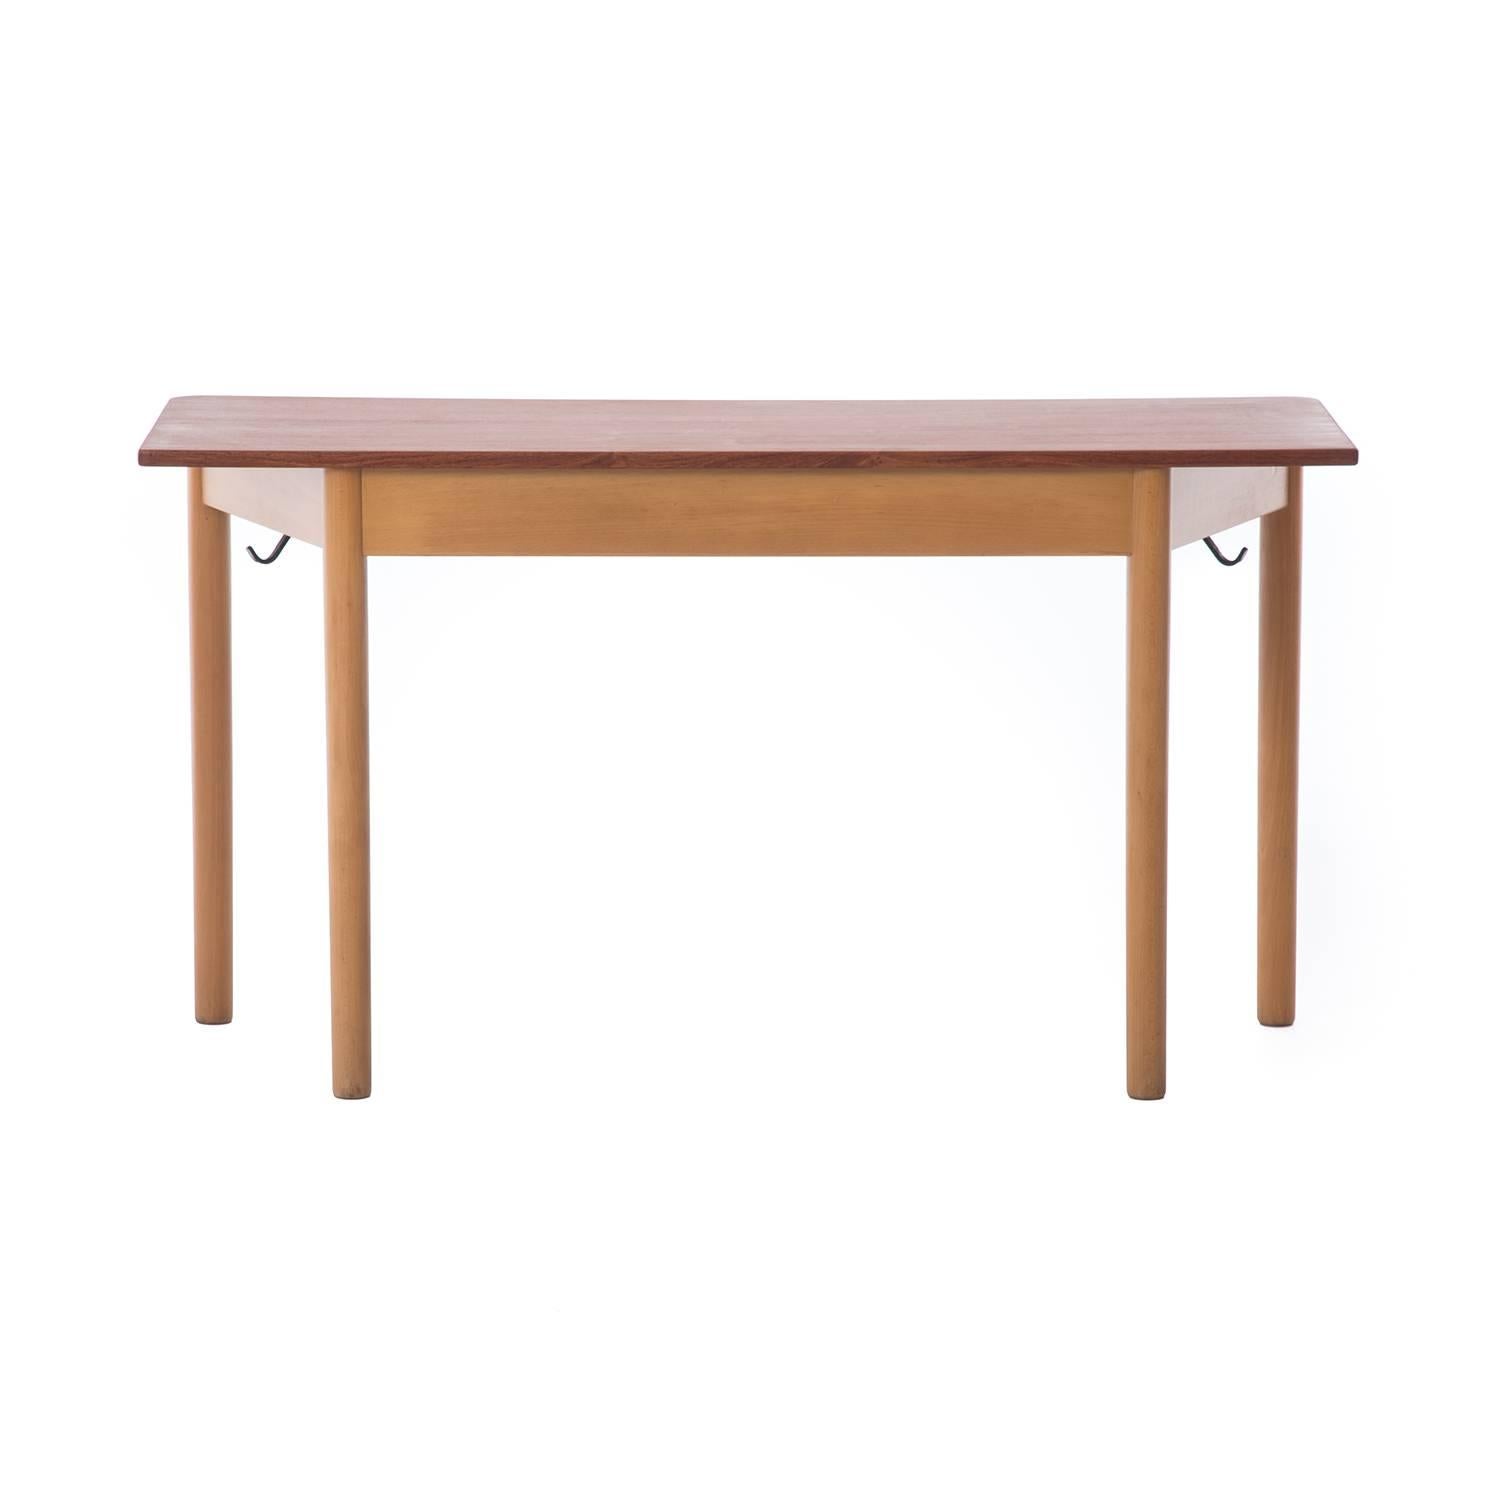 This table was designed as a school desk for Danish school children, note the iron book-bag hooks peaking out from underneath (these hooks are removable but they add character to the piece). Front edges of table have a curved detail while back